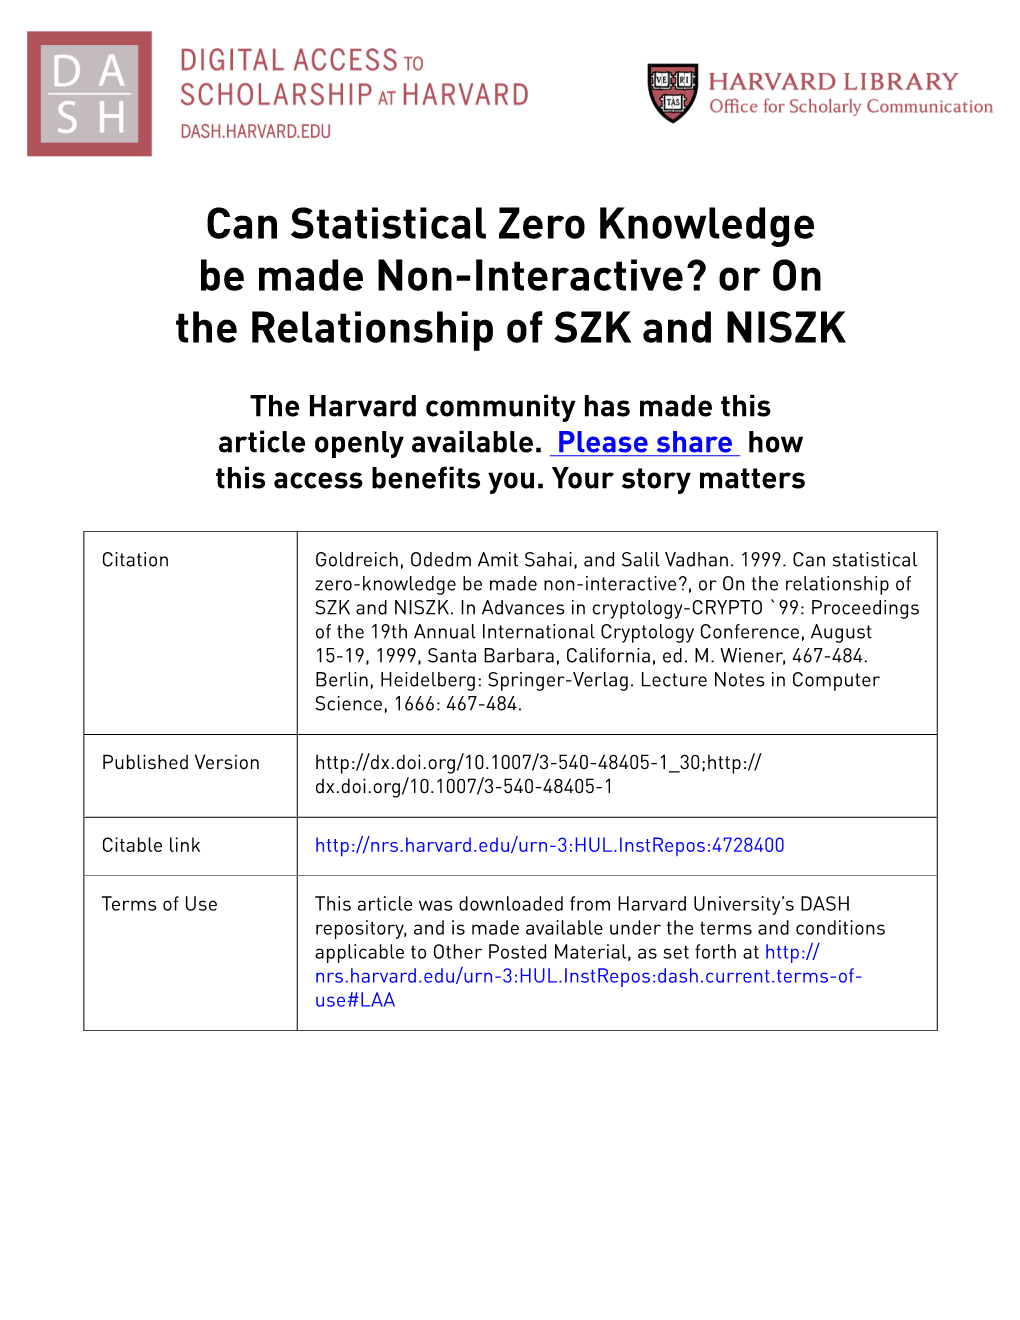 Can Statistical Zero Knowledge Be Made Non-Interactive? Or on the Relationship of SZK and NISZK